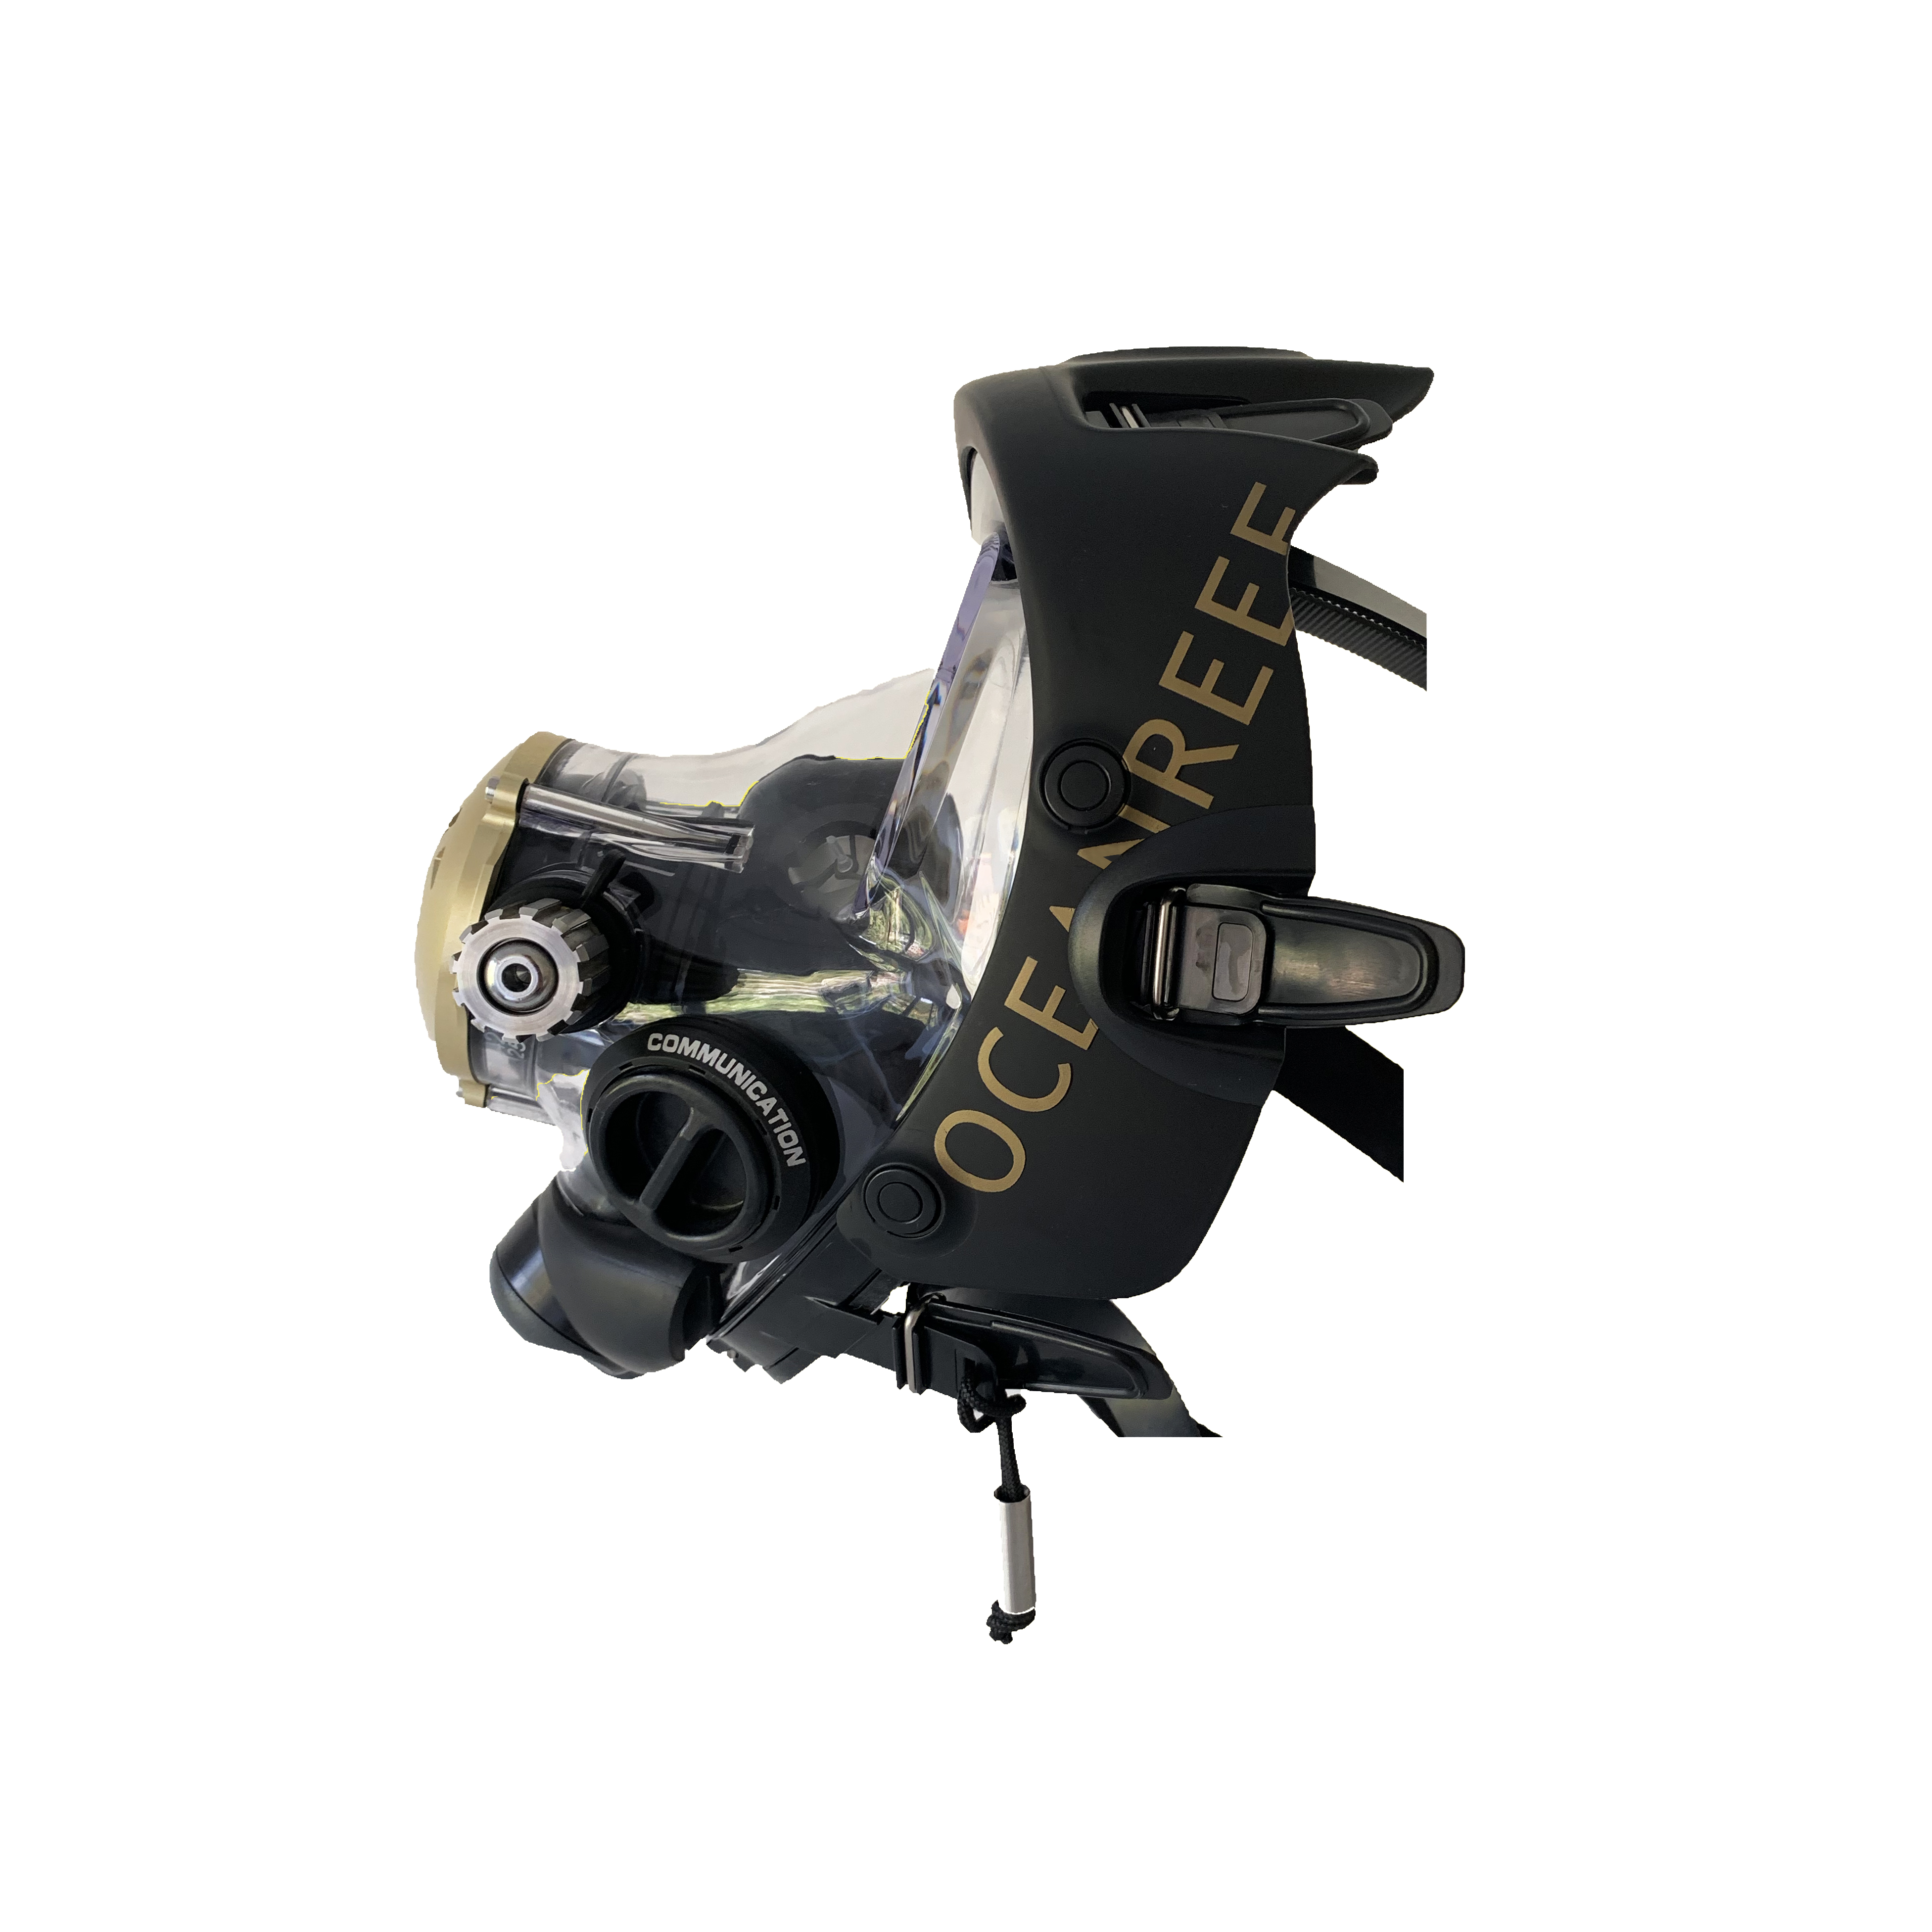 Open Box Ocean Reef Predator Extender-Diving Full Face Mask with INT 2nd Stage, Surface Air Valve & Hose-New SS Adj Knob